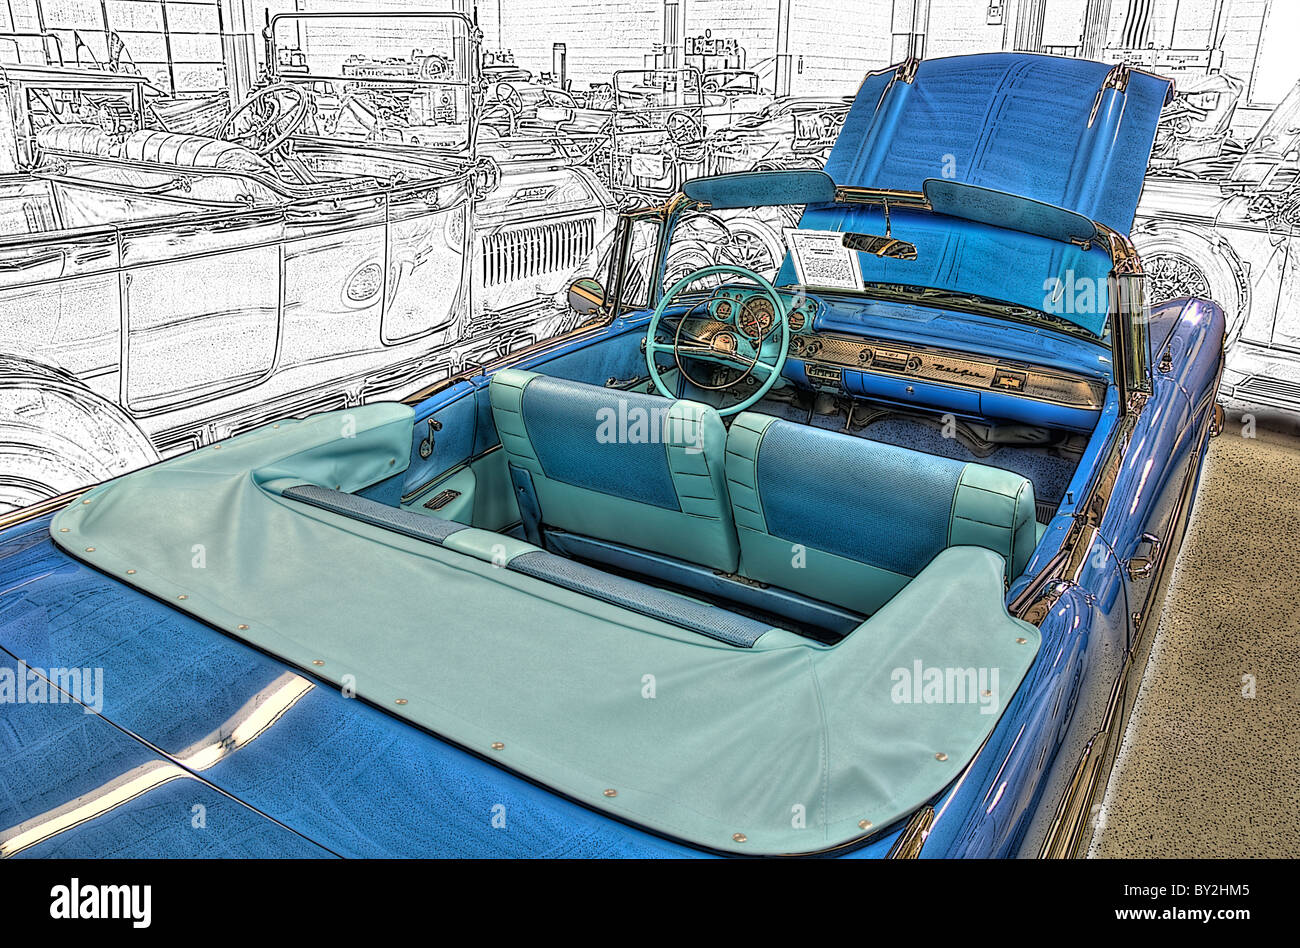 1957 Chevy Bel Air Convertible Stock Photo